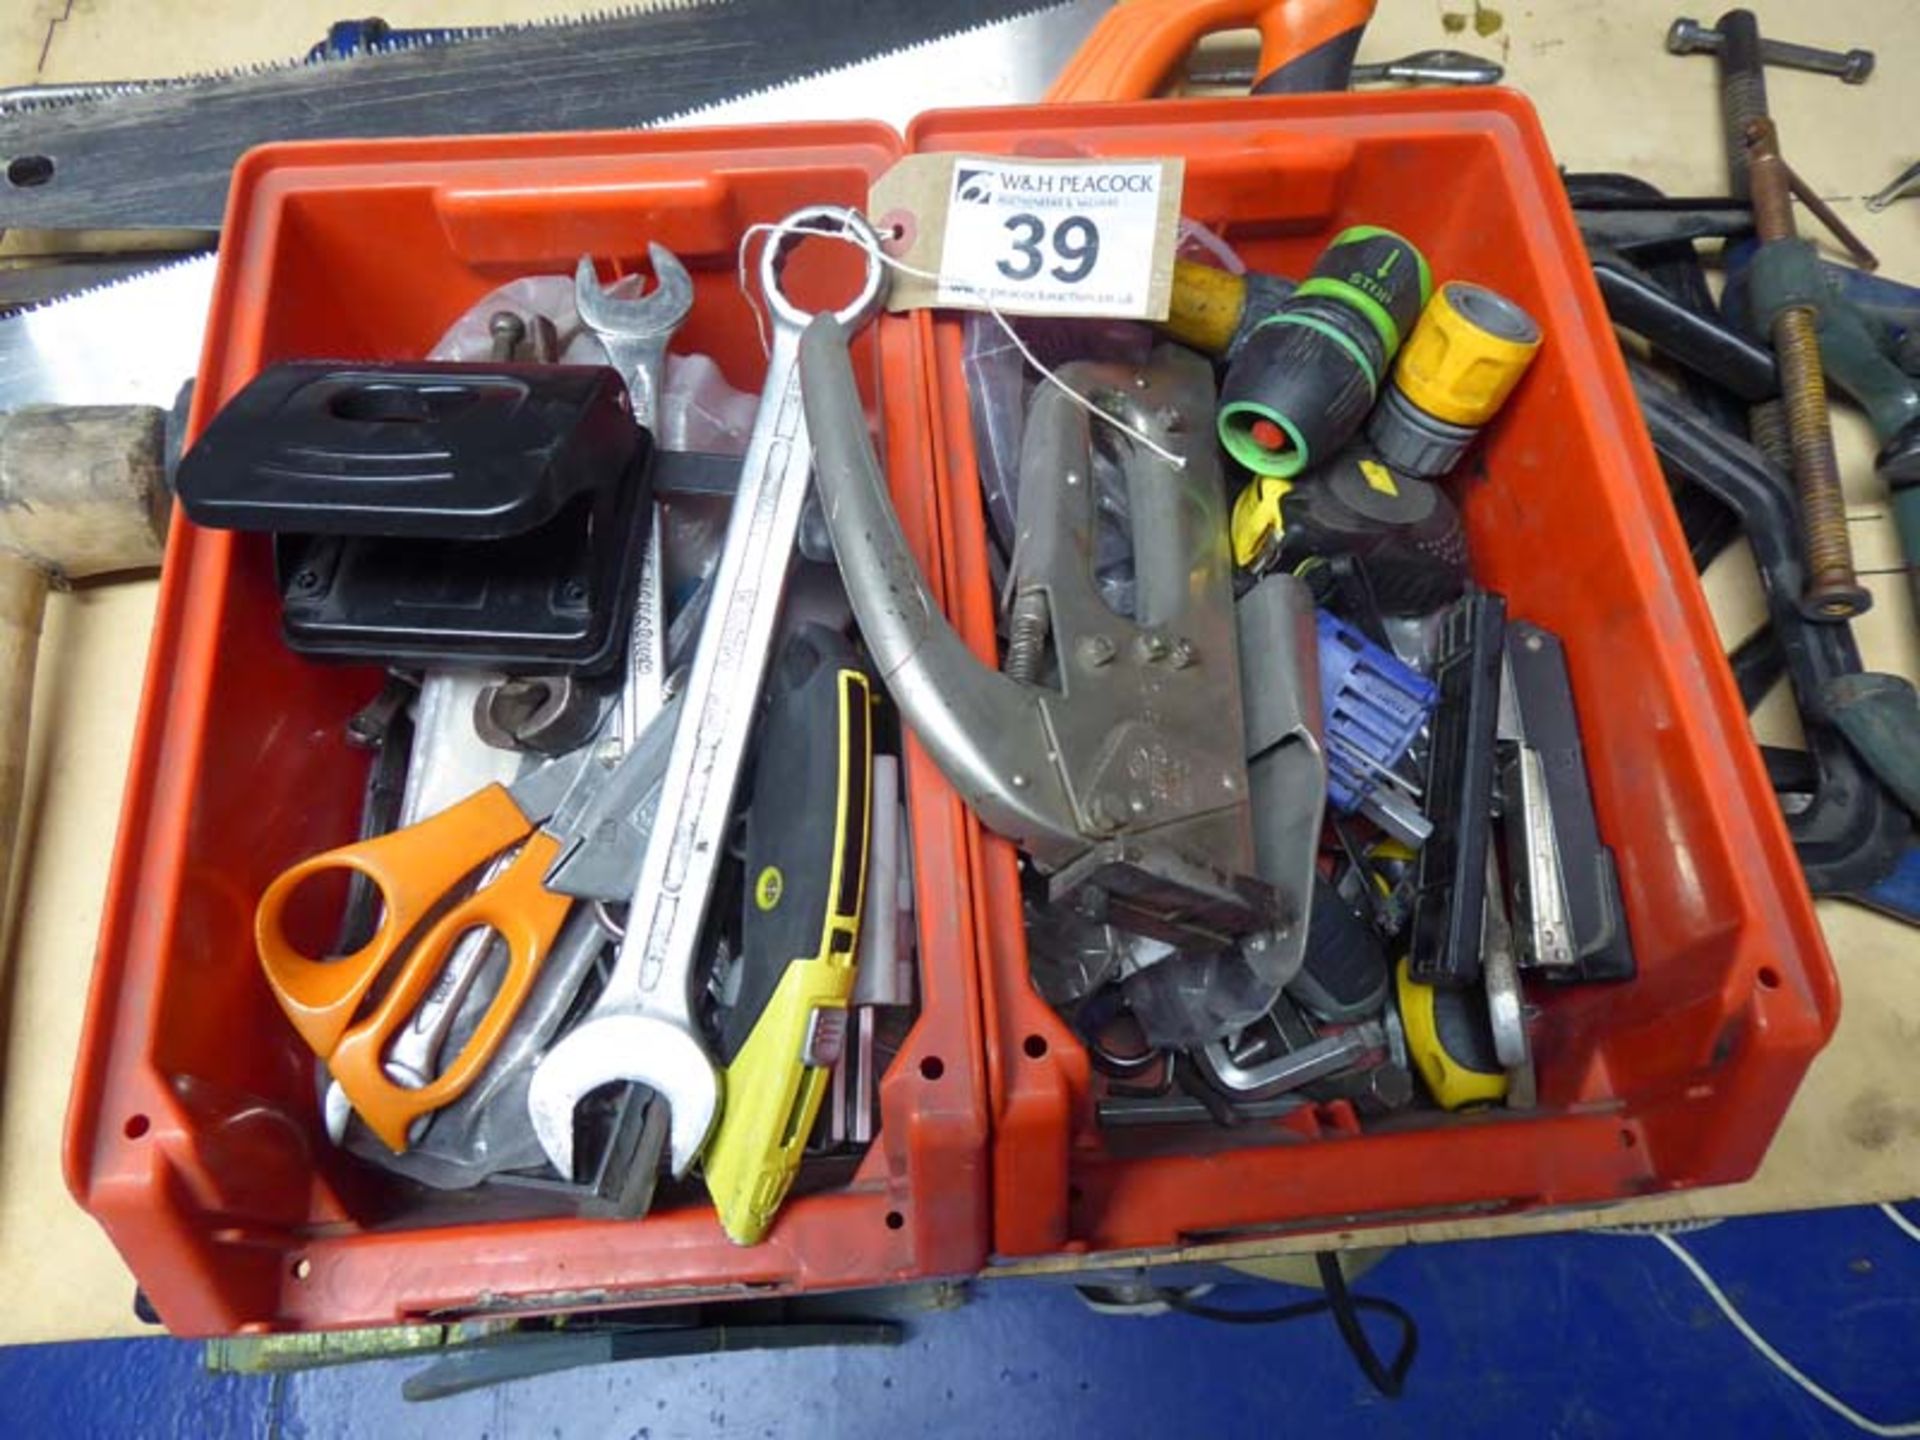 Range of hand held tools, G clamps, nuts, bolts, fixings etc - Image 3 of 6